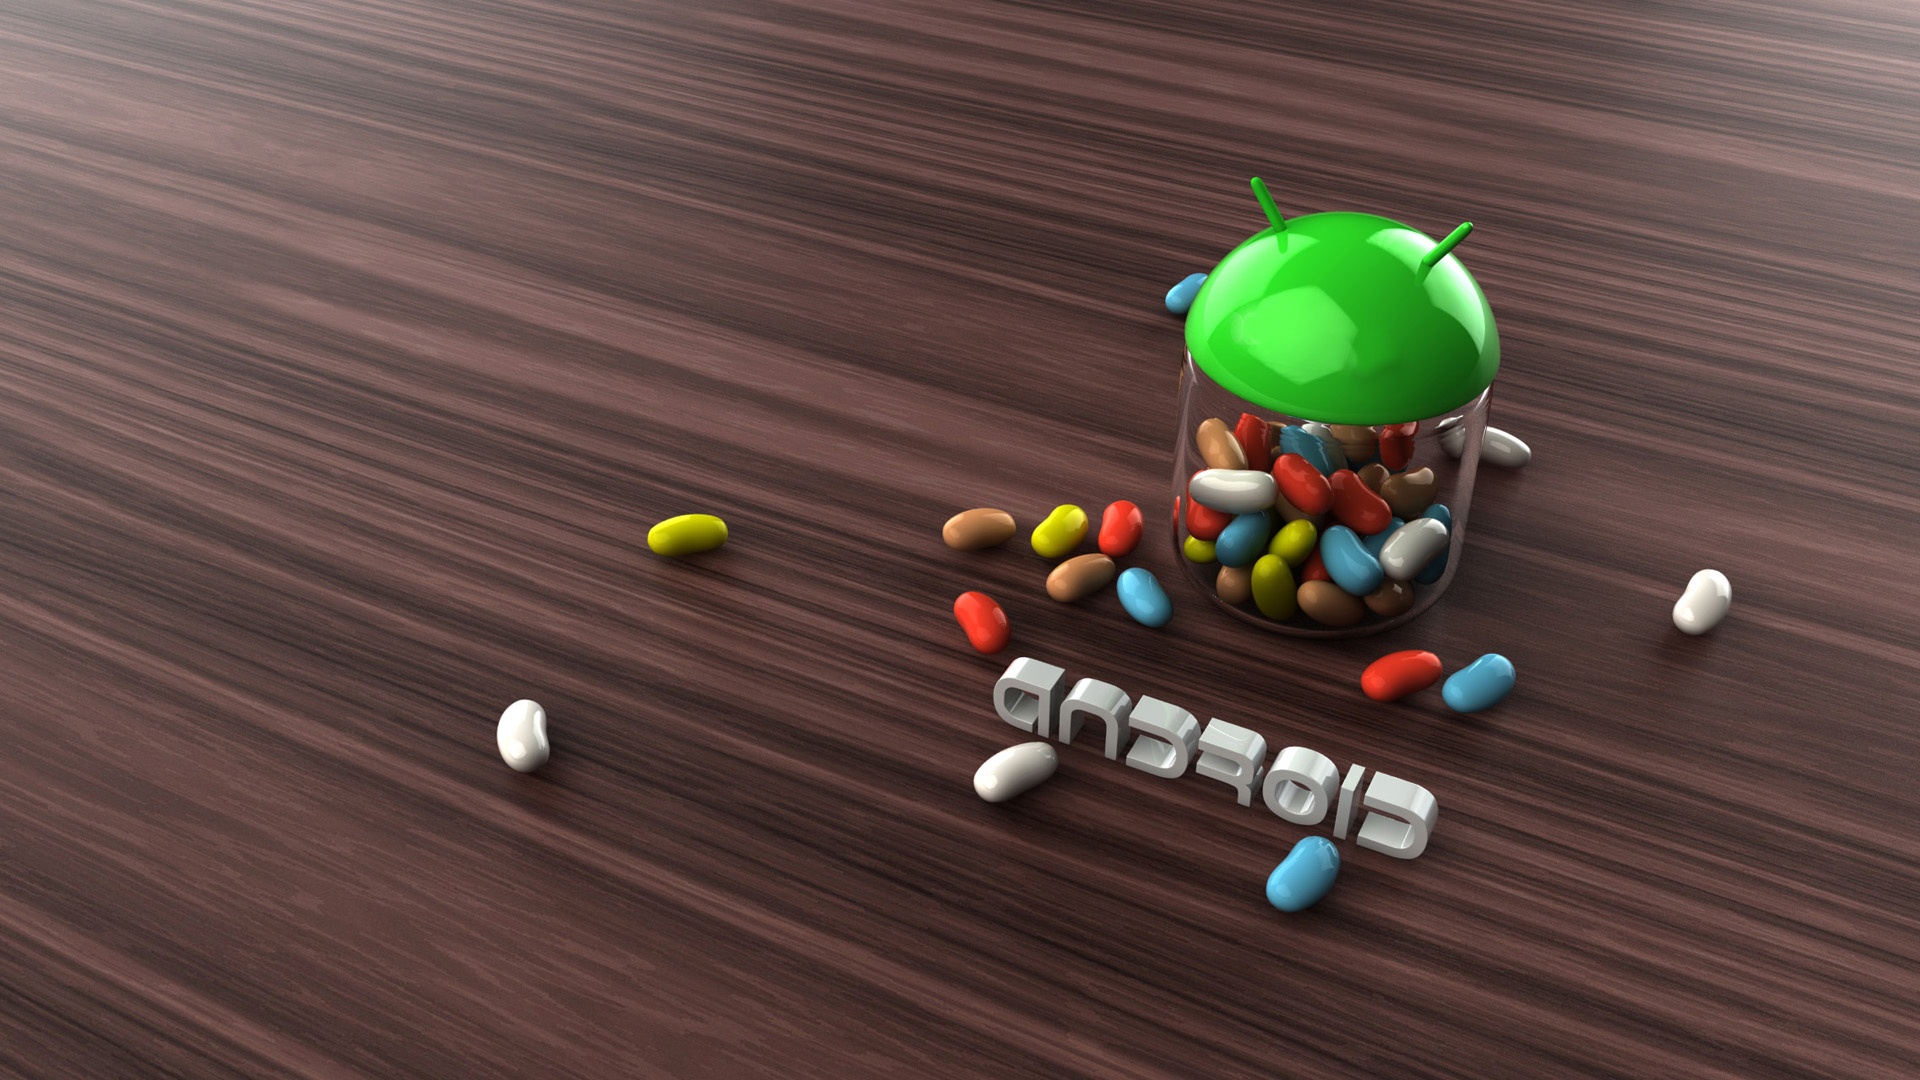 download jelly bean software for mobile